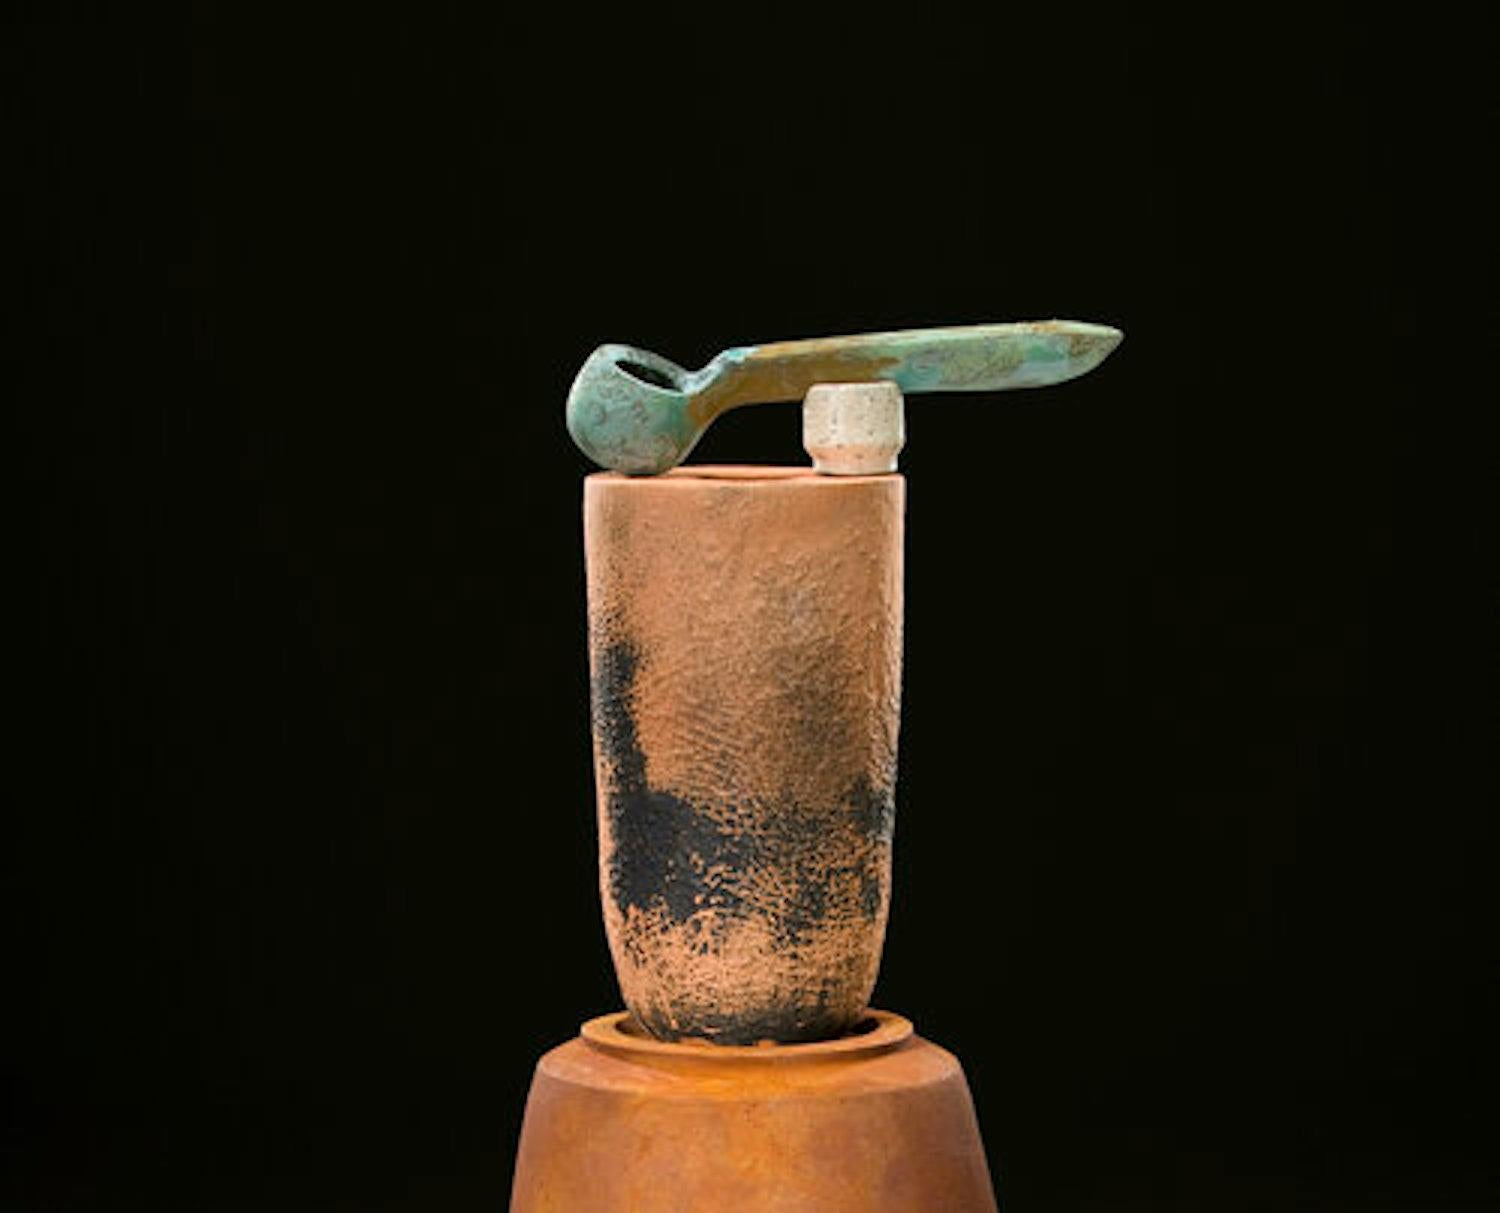 Richard Hirsch Glazed Ceramic Crucible Sculpture #1, 2011 In Excellent Condition For Sale In New York, NY